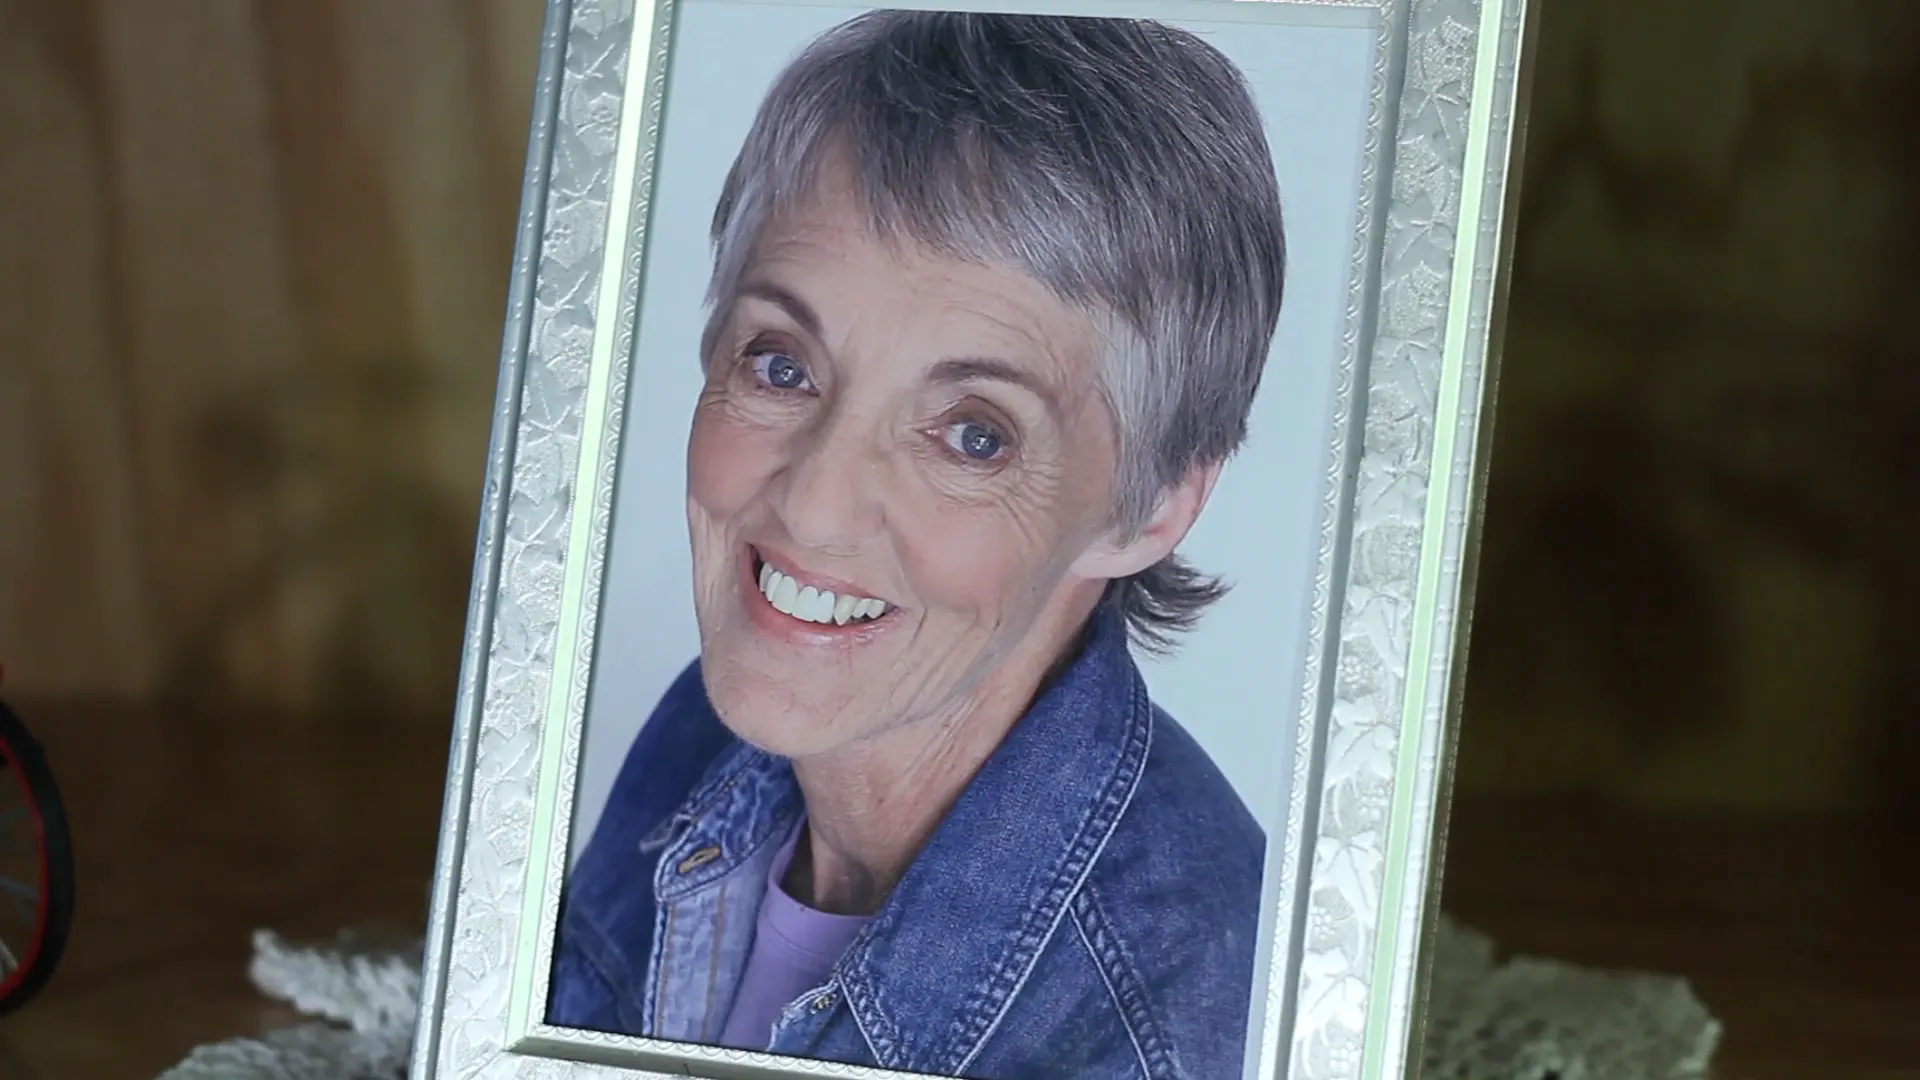 Toni Corbett's picture in a picture frame in THE GOLdEN TREE (2010).